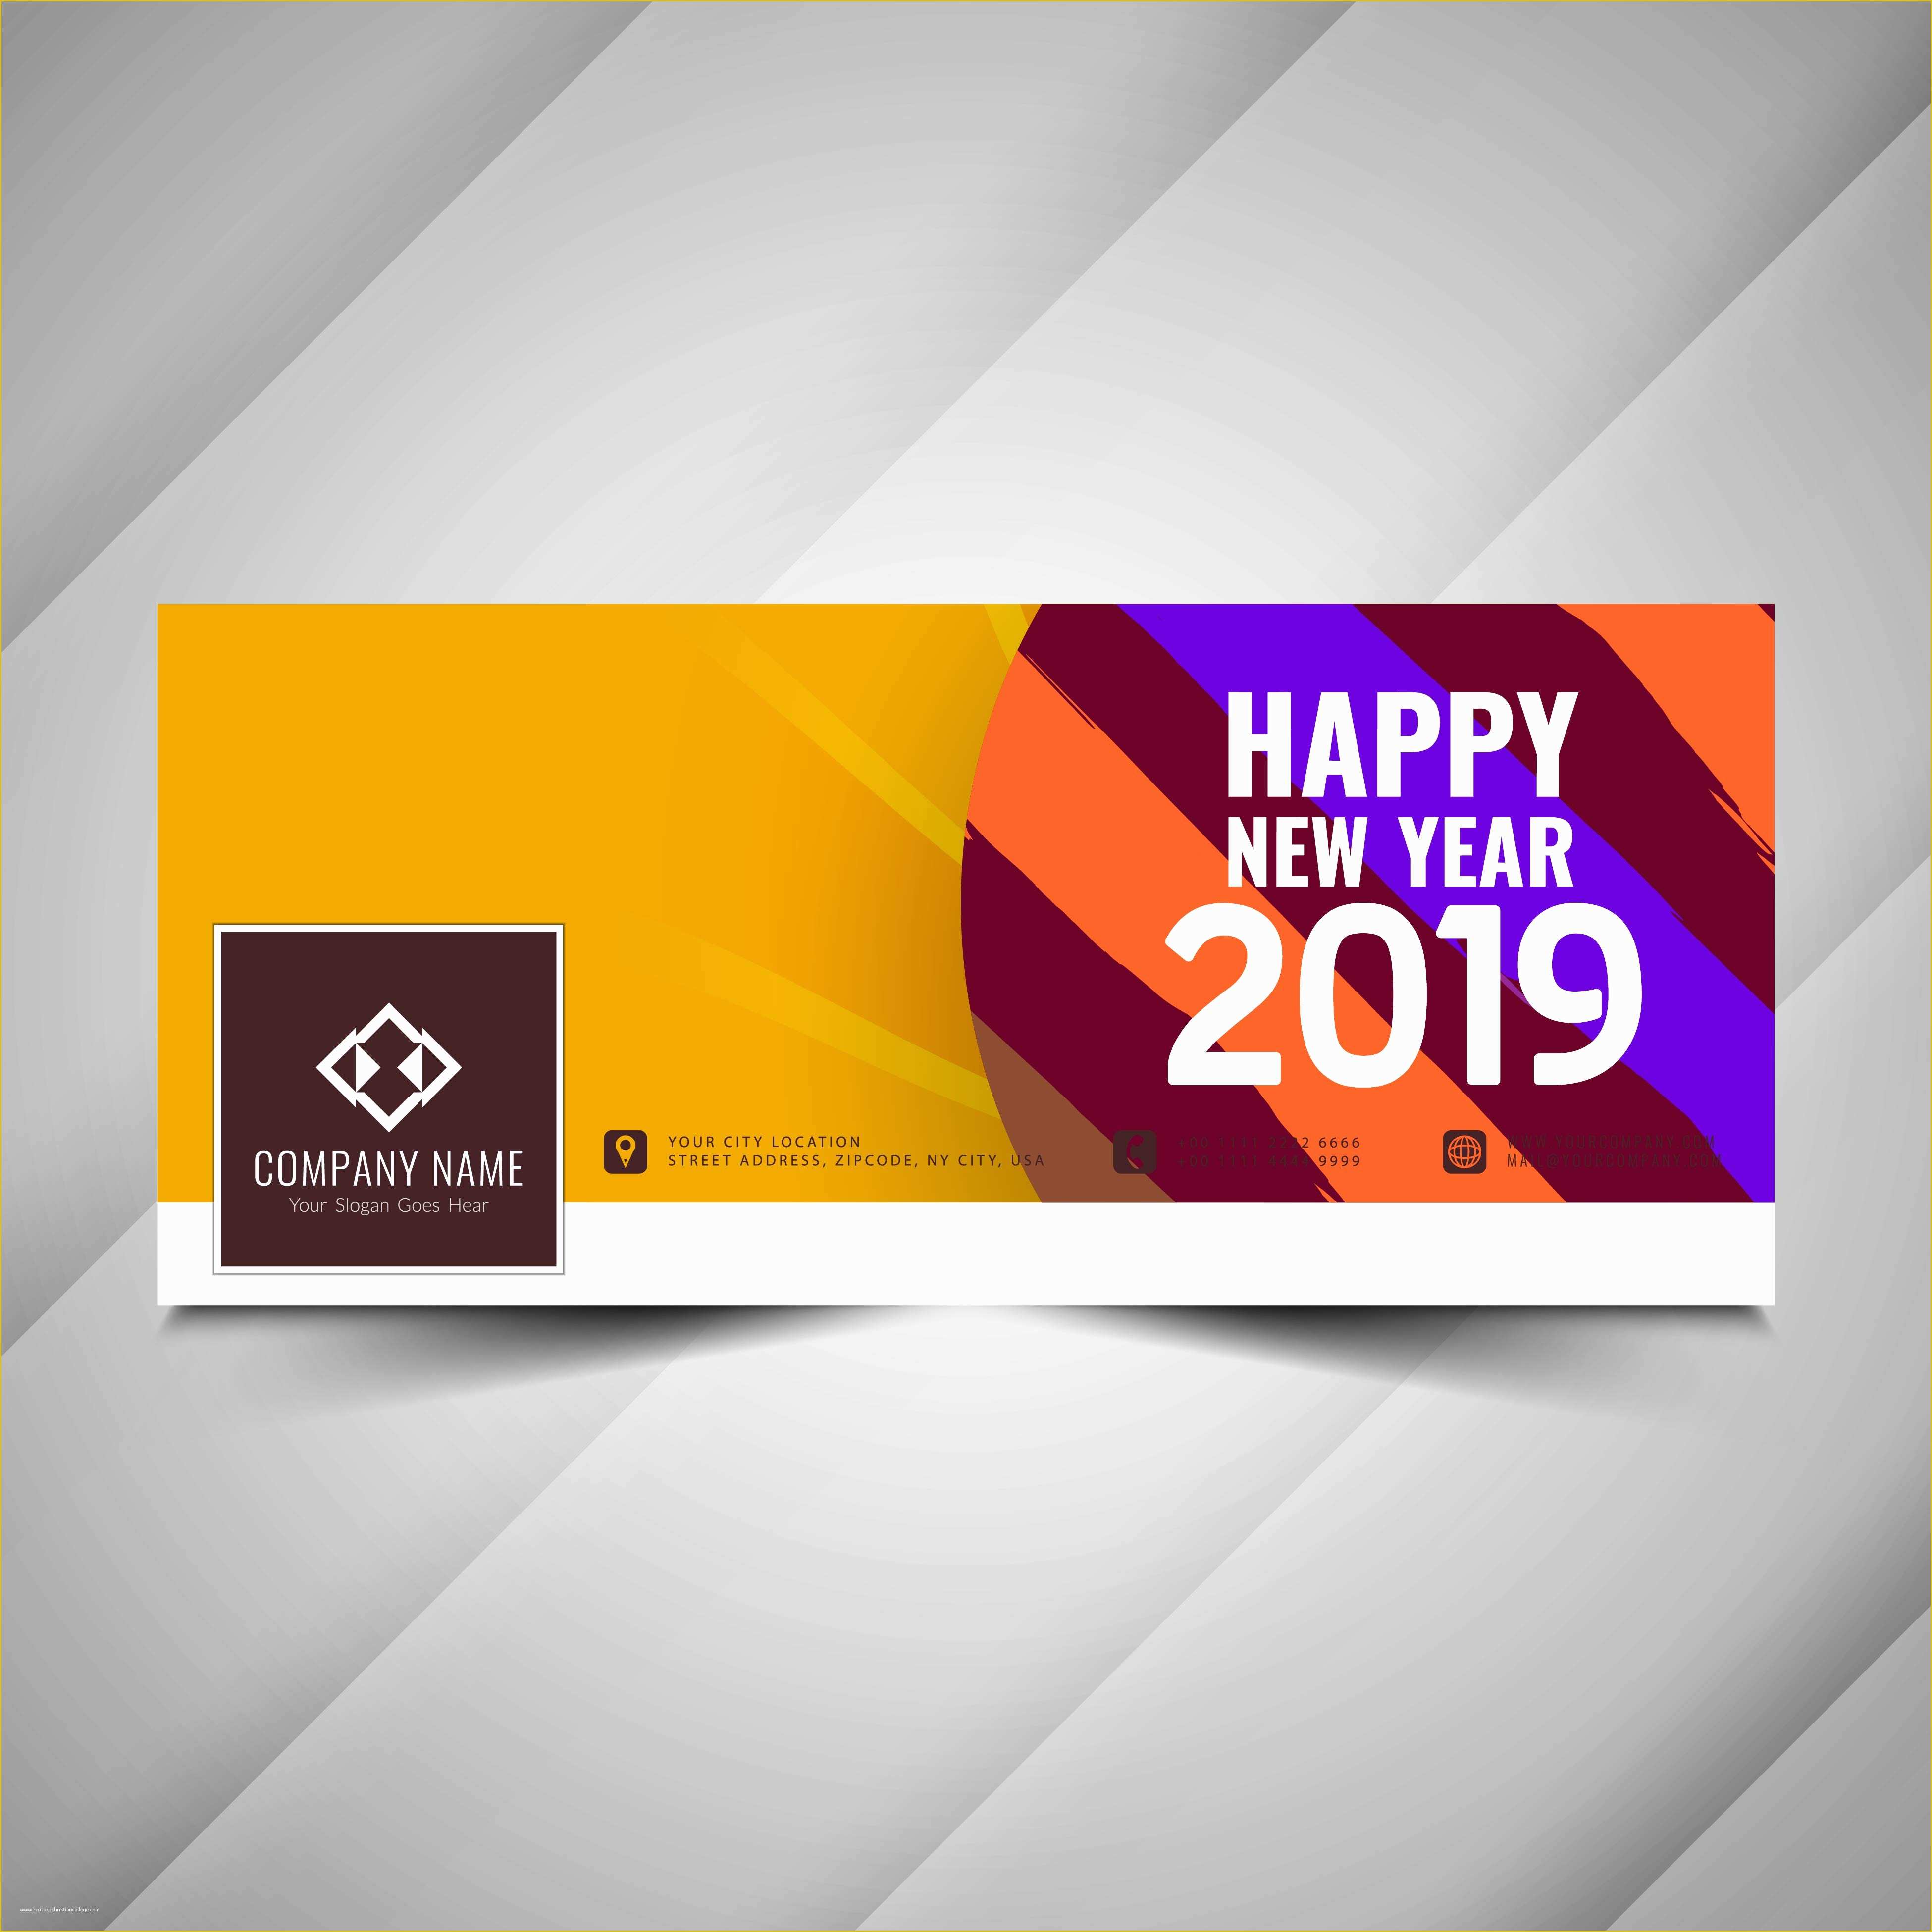 Social Media Banner Templates Free Of New Year 2019 Stylish social Media Banner Template